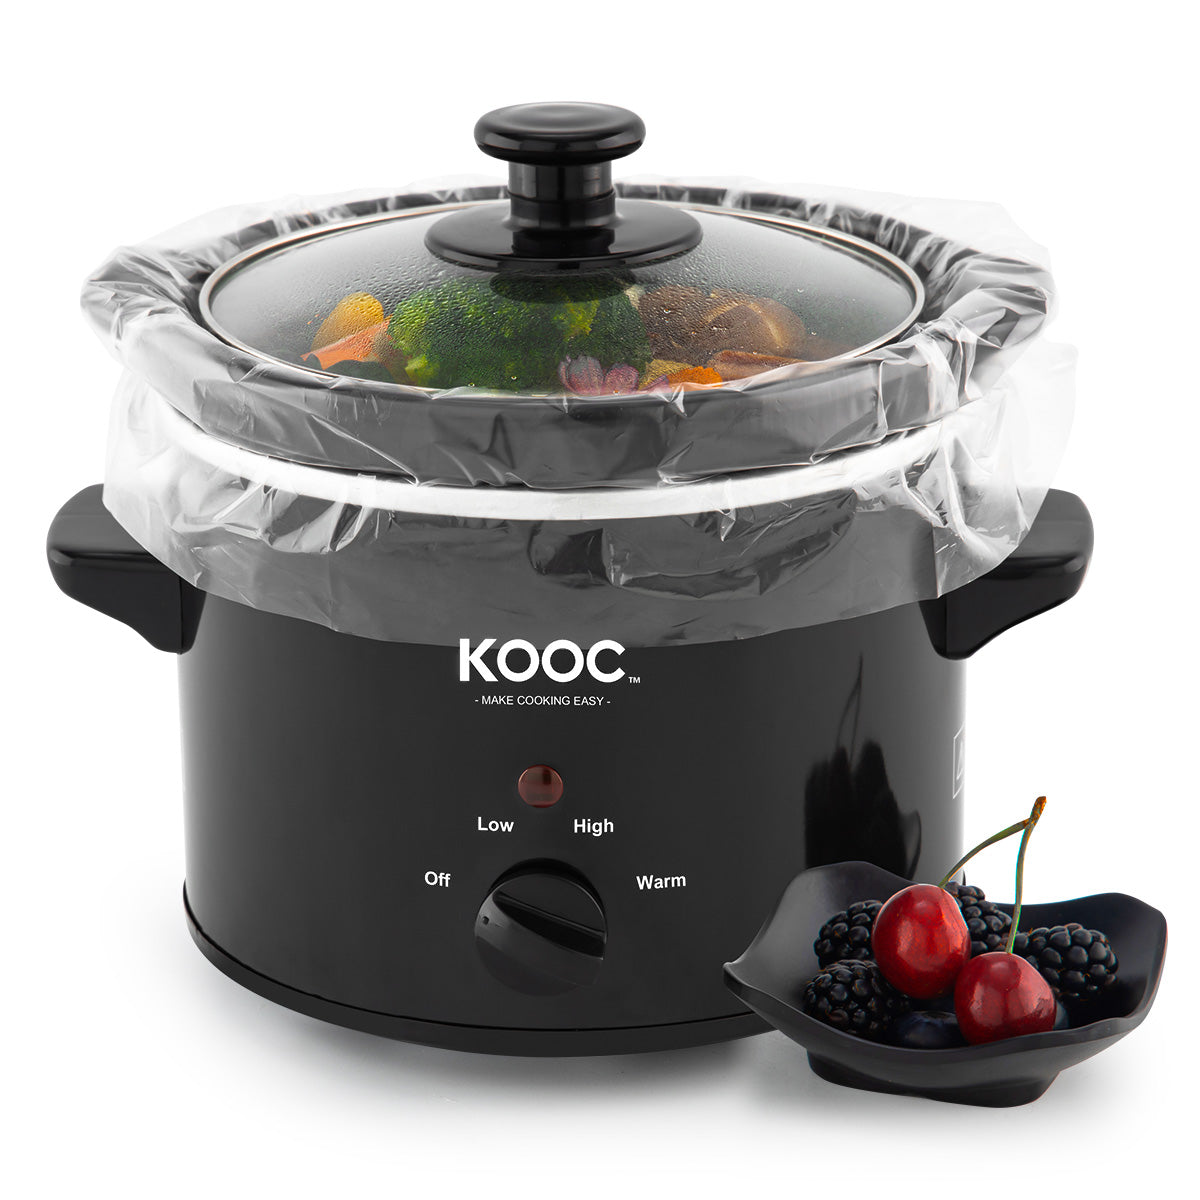  KOOC Small Slow Cooker, 2-Quart, Free Liners Included